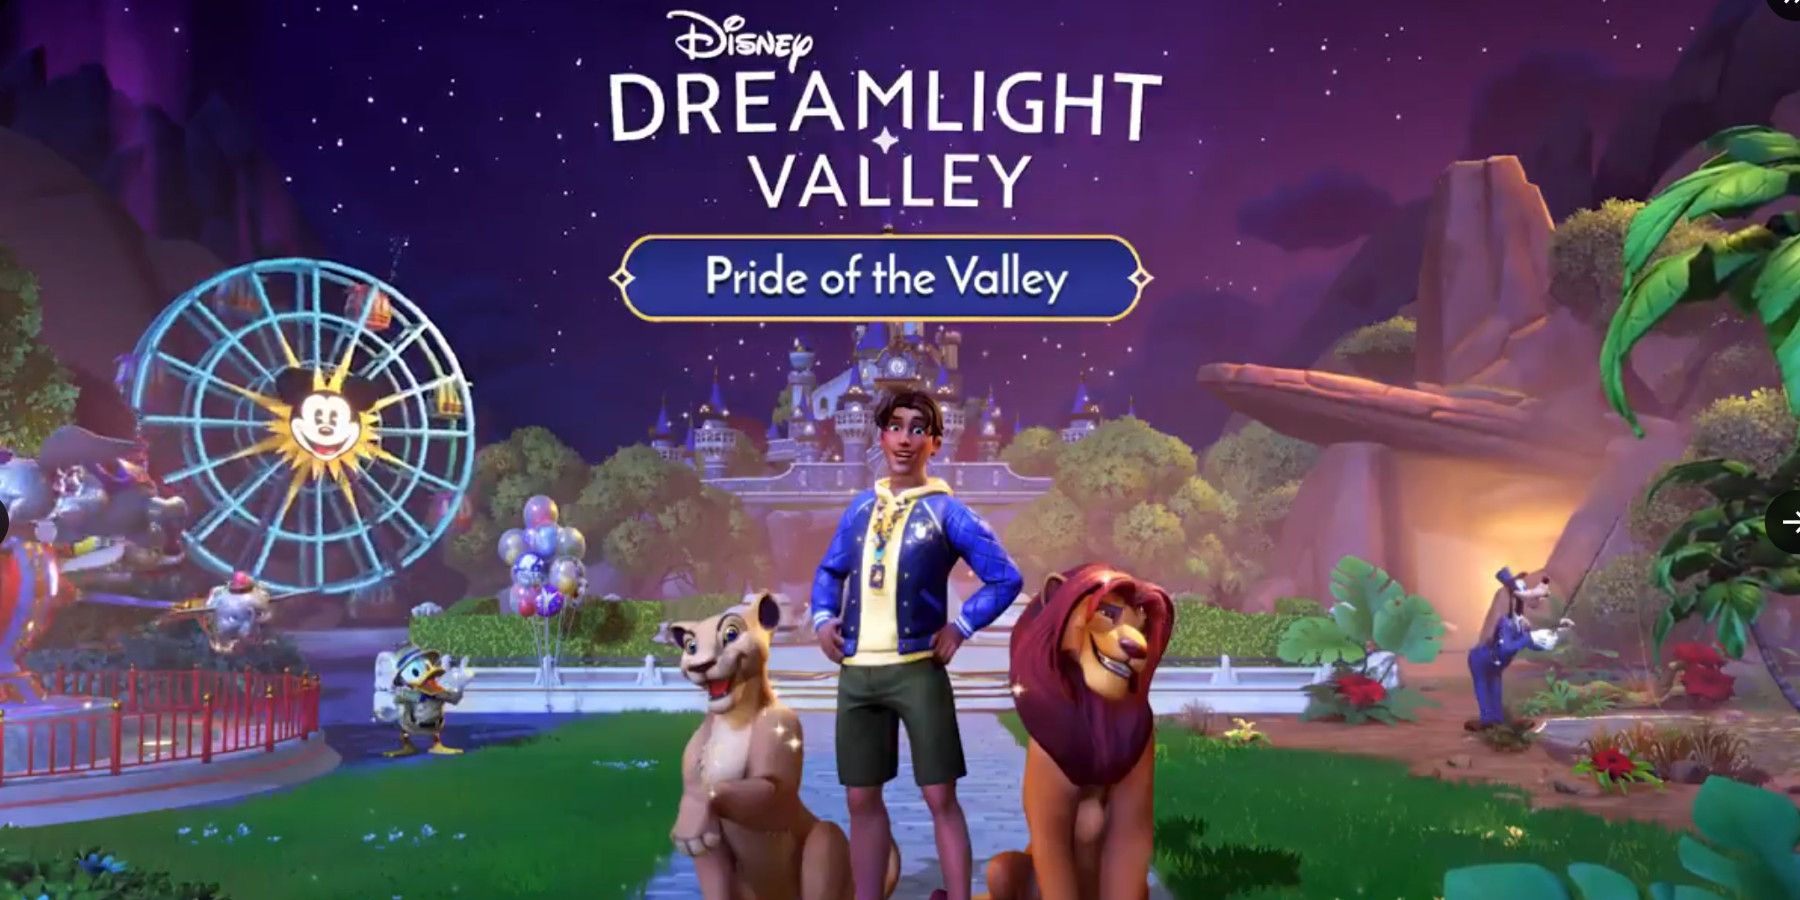 Disney Dreamlight Valley Releases Patch Notes for Pride of the Valley